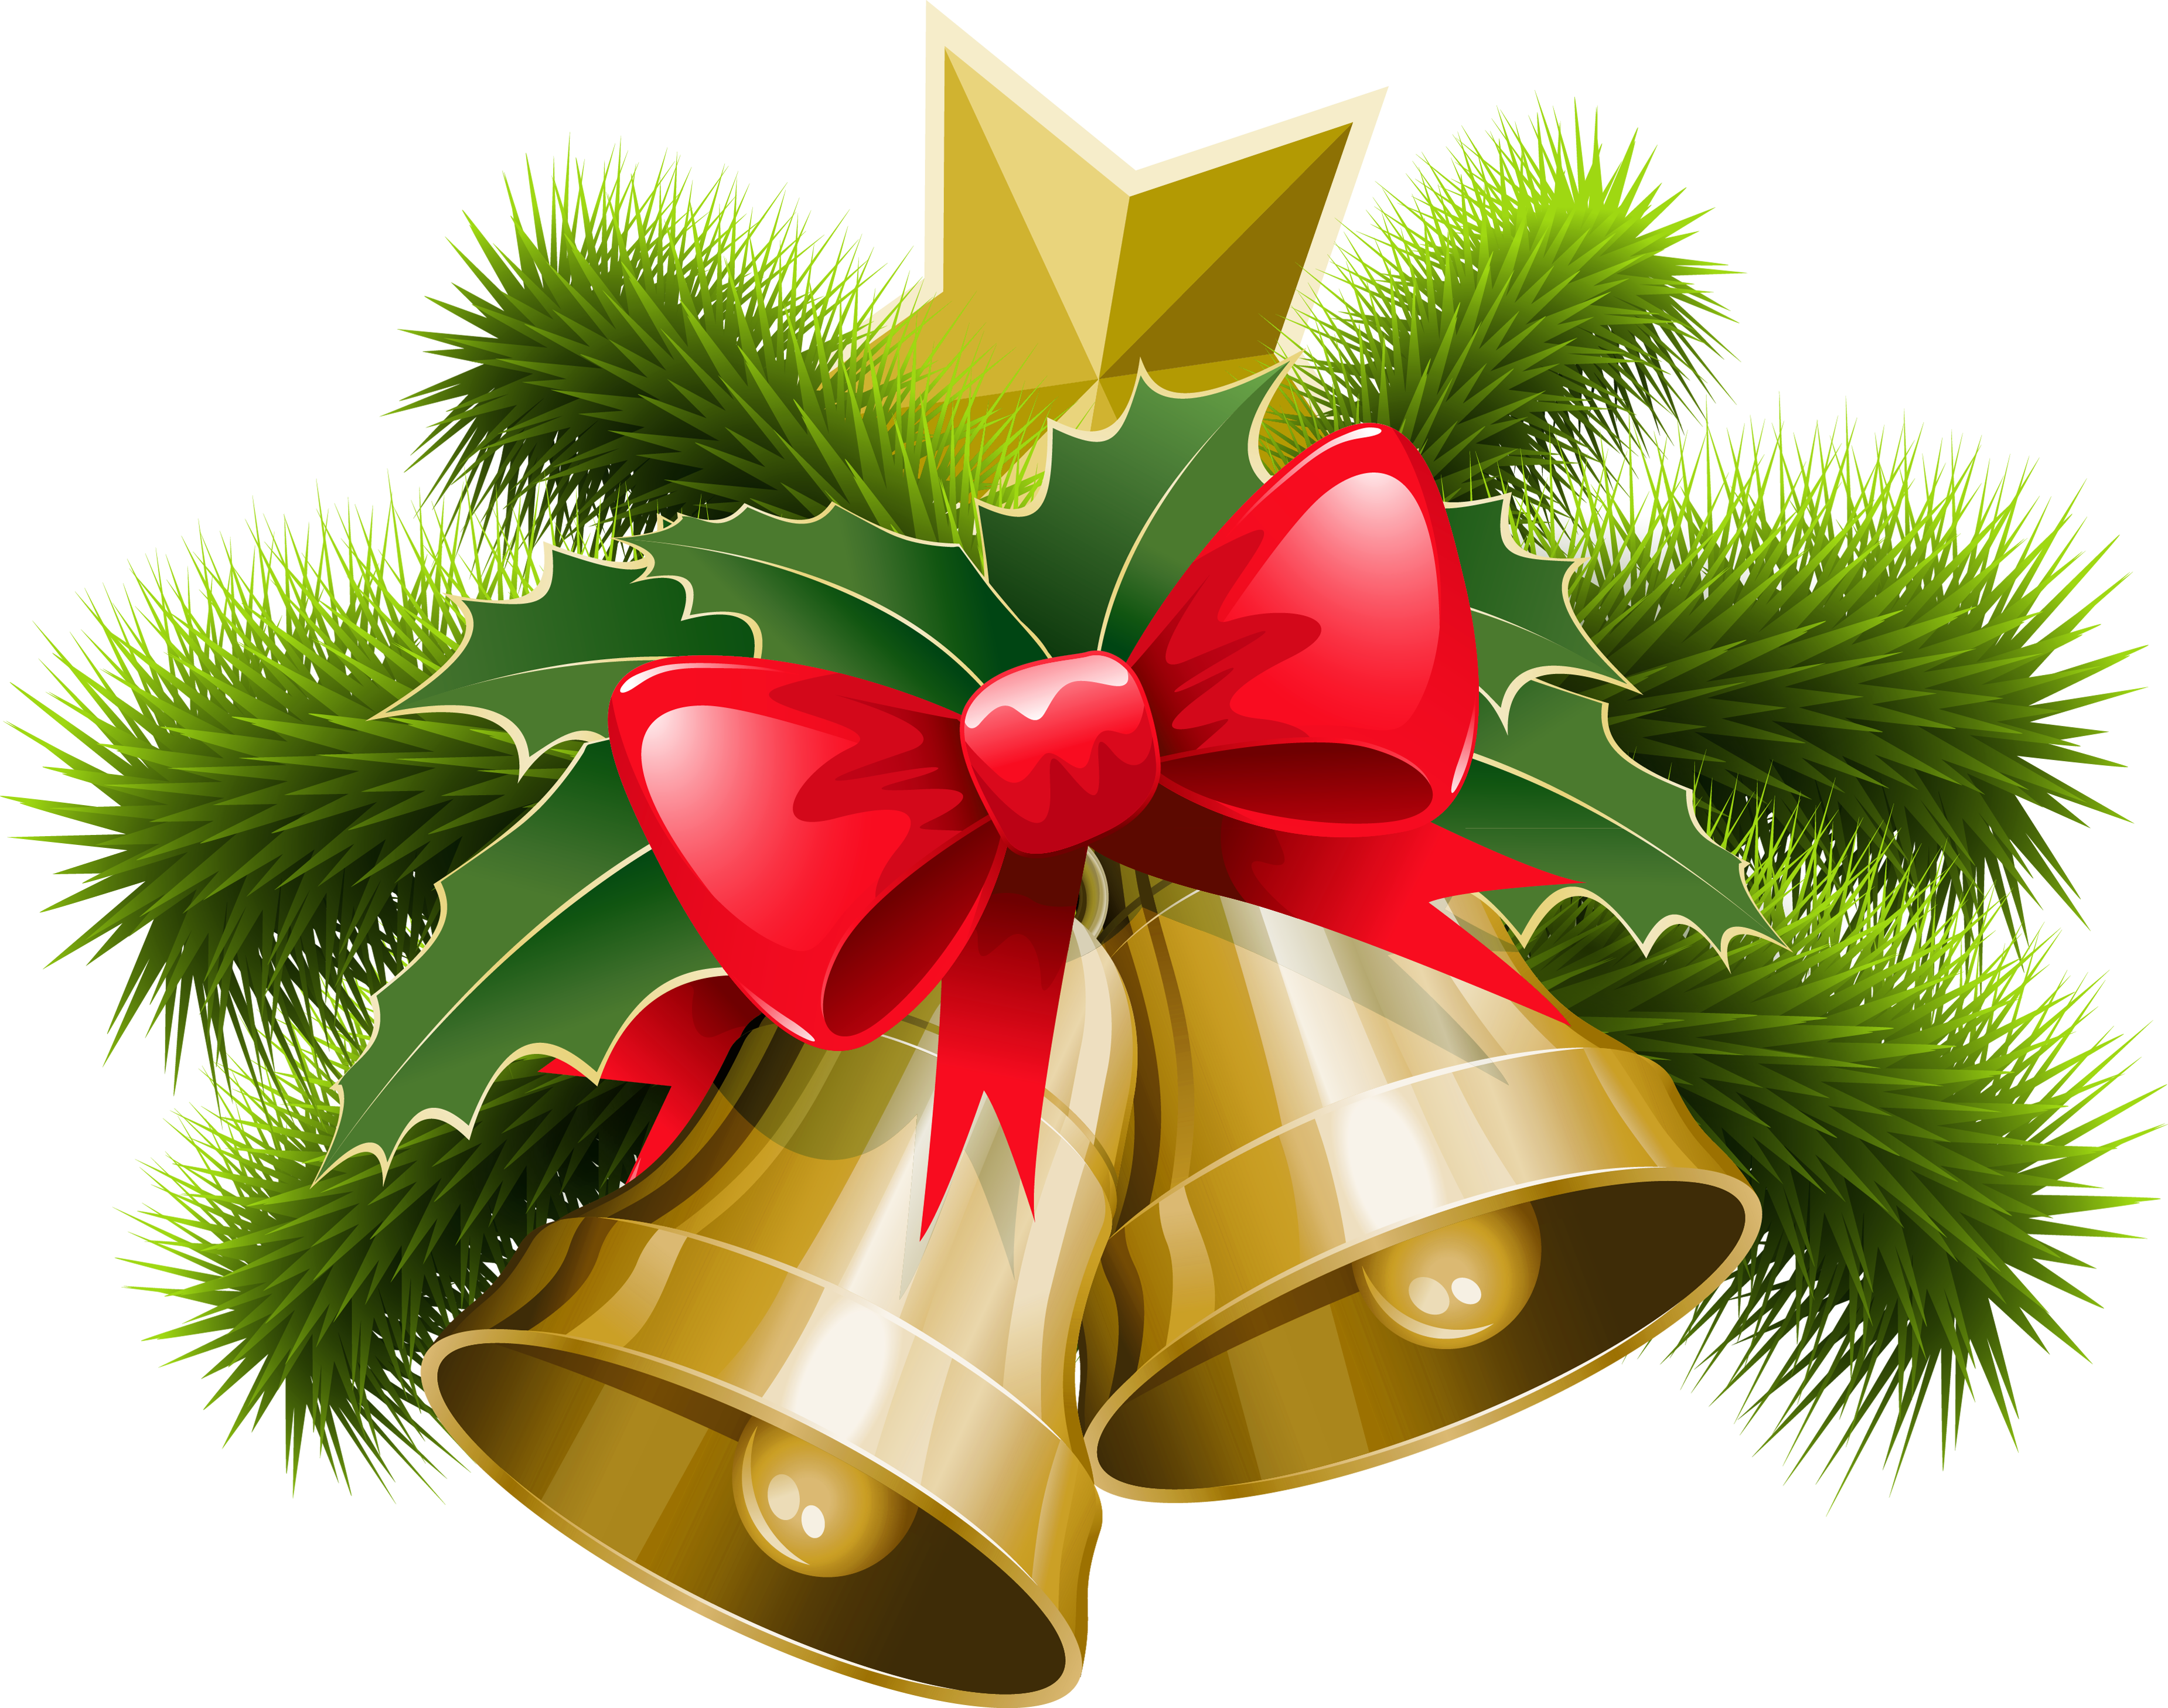 Christmas Ribbon 2 Clipart for Free Download